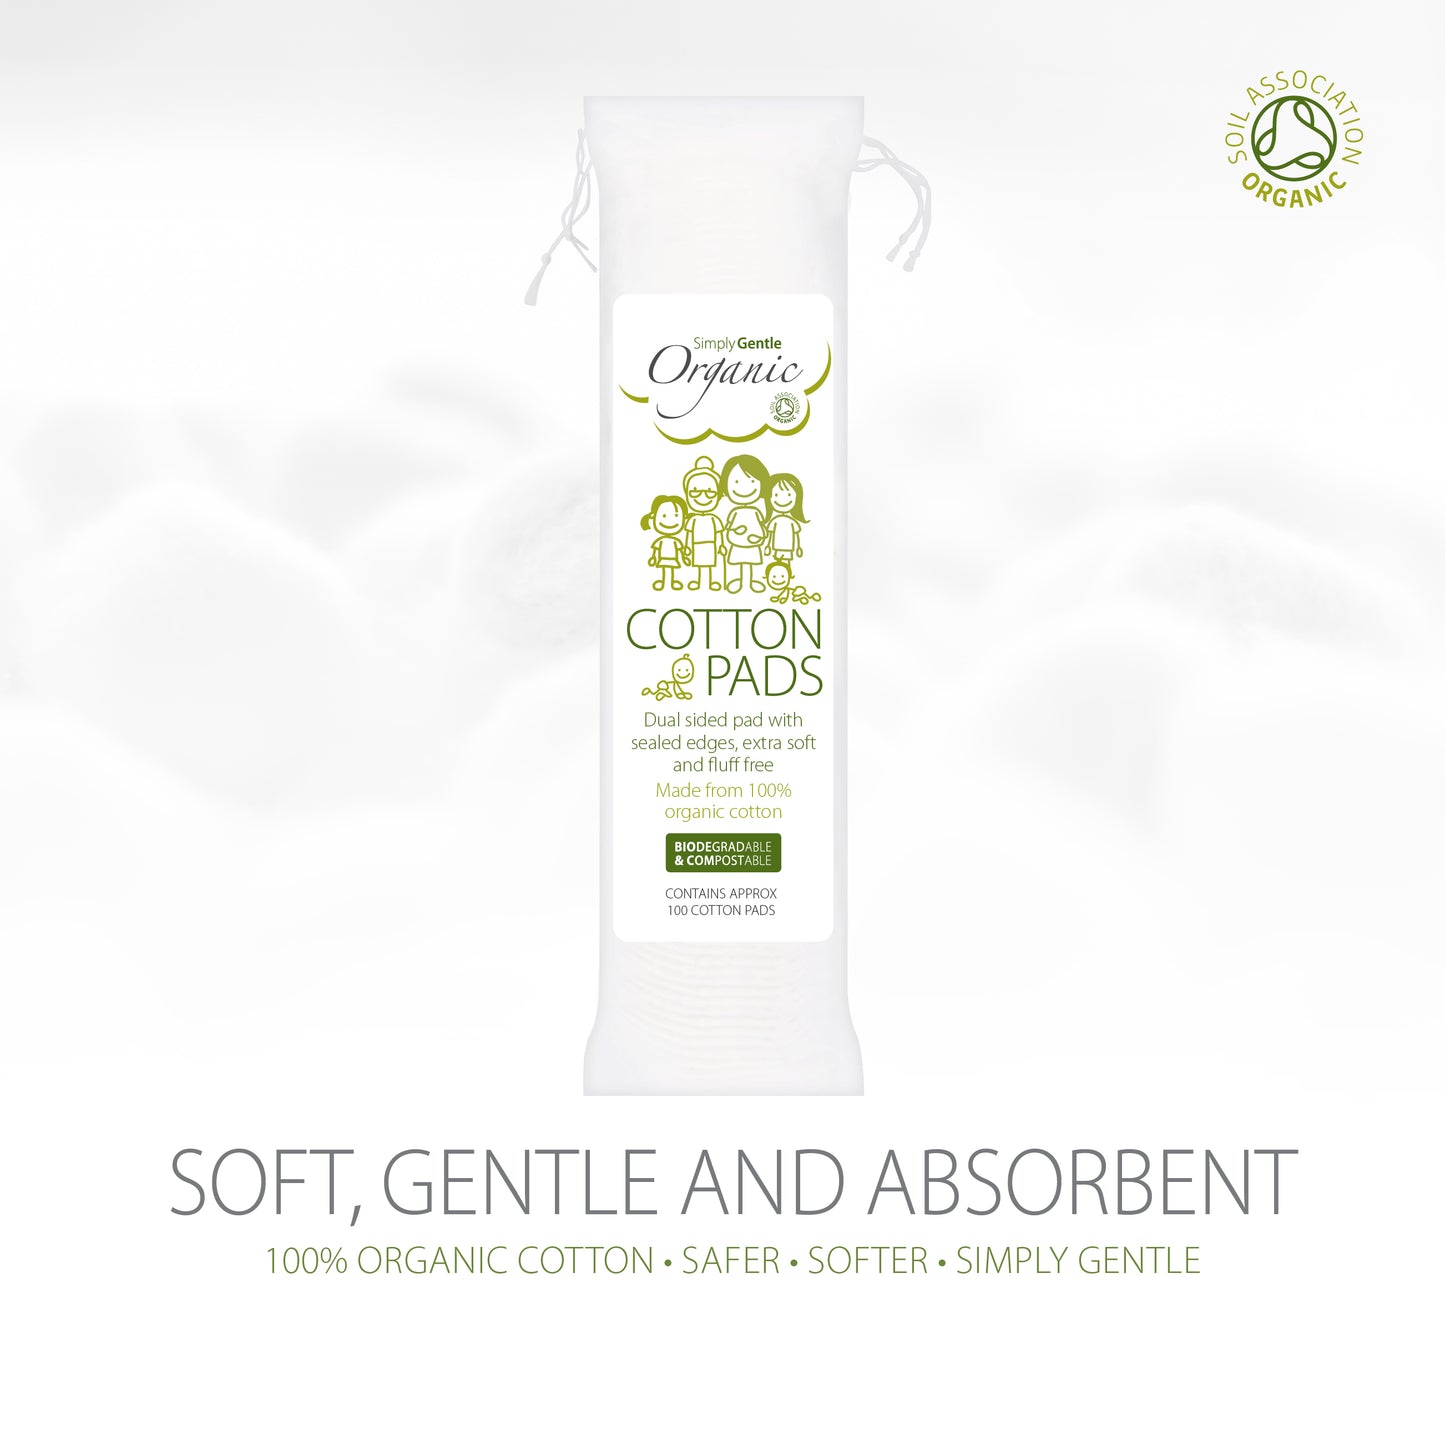 Simply Gentle Organic Cotton Pads soft, gentle and absorbent, our round organic cotton wool pads are ideal for all of your beauty needs. The pad is low lint, dual sided, with sealed edges ideal for applying lotions, creams and liquids. 100% organic cotton wool. Soil Association approved.